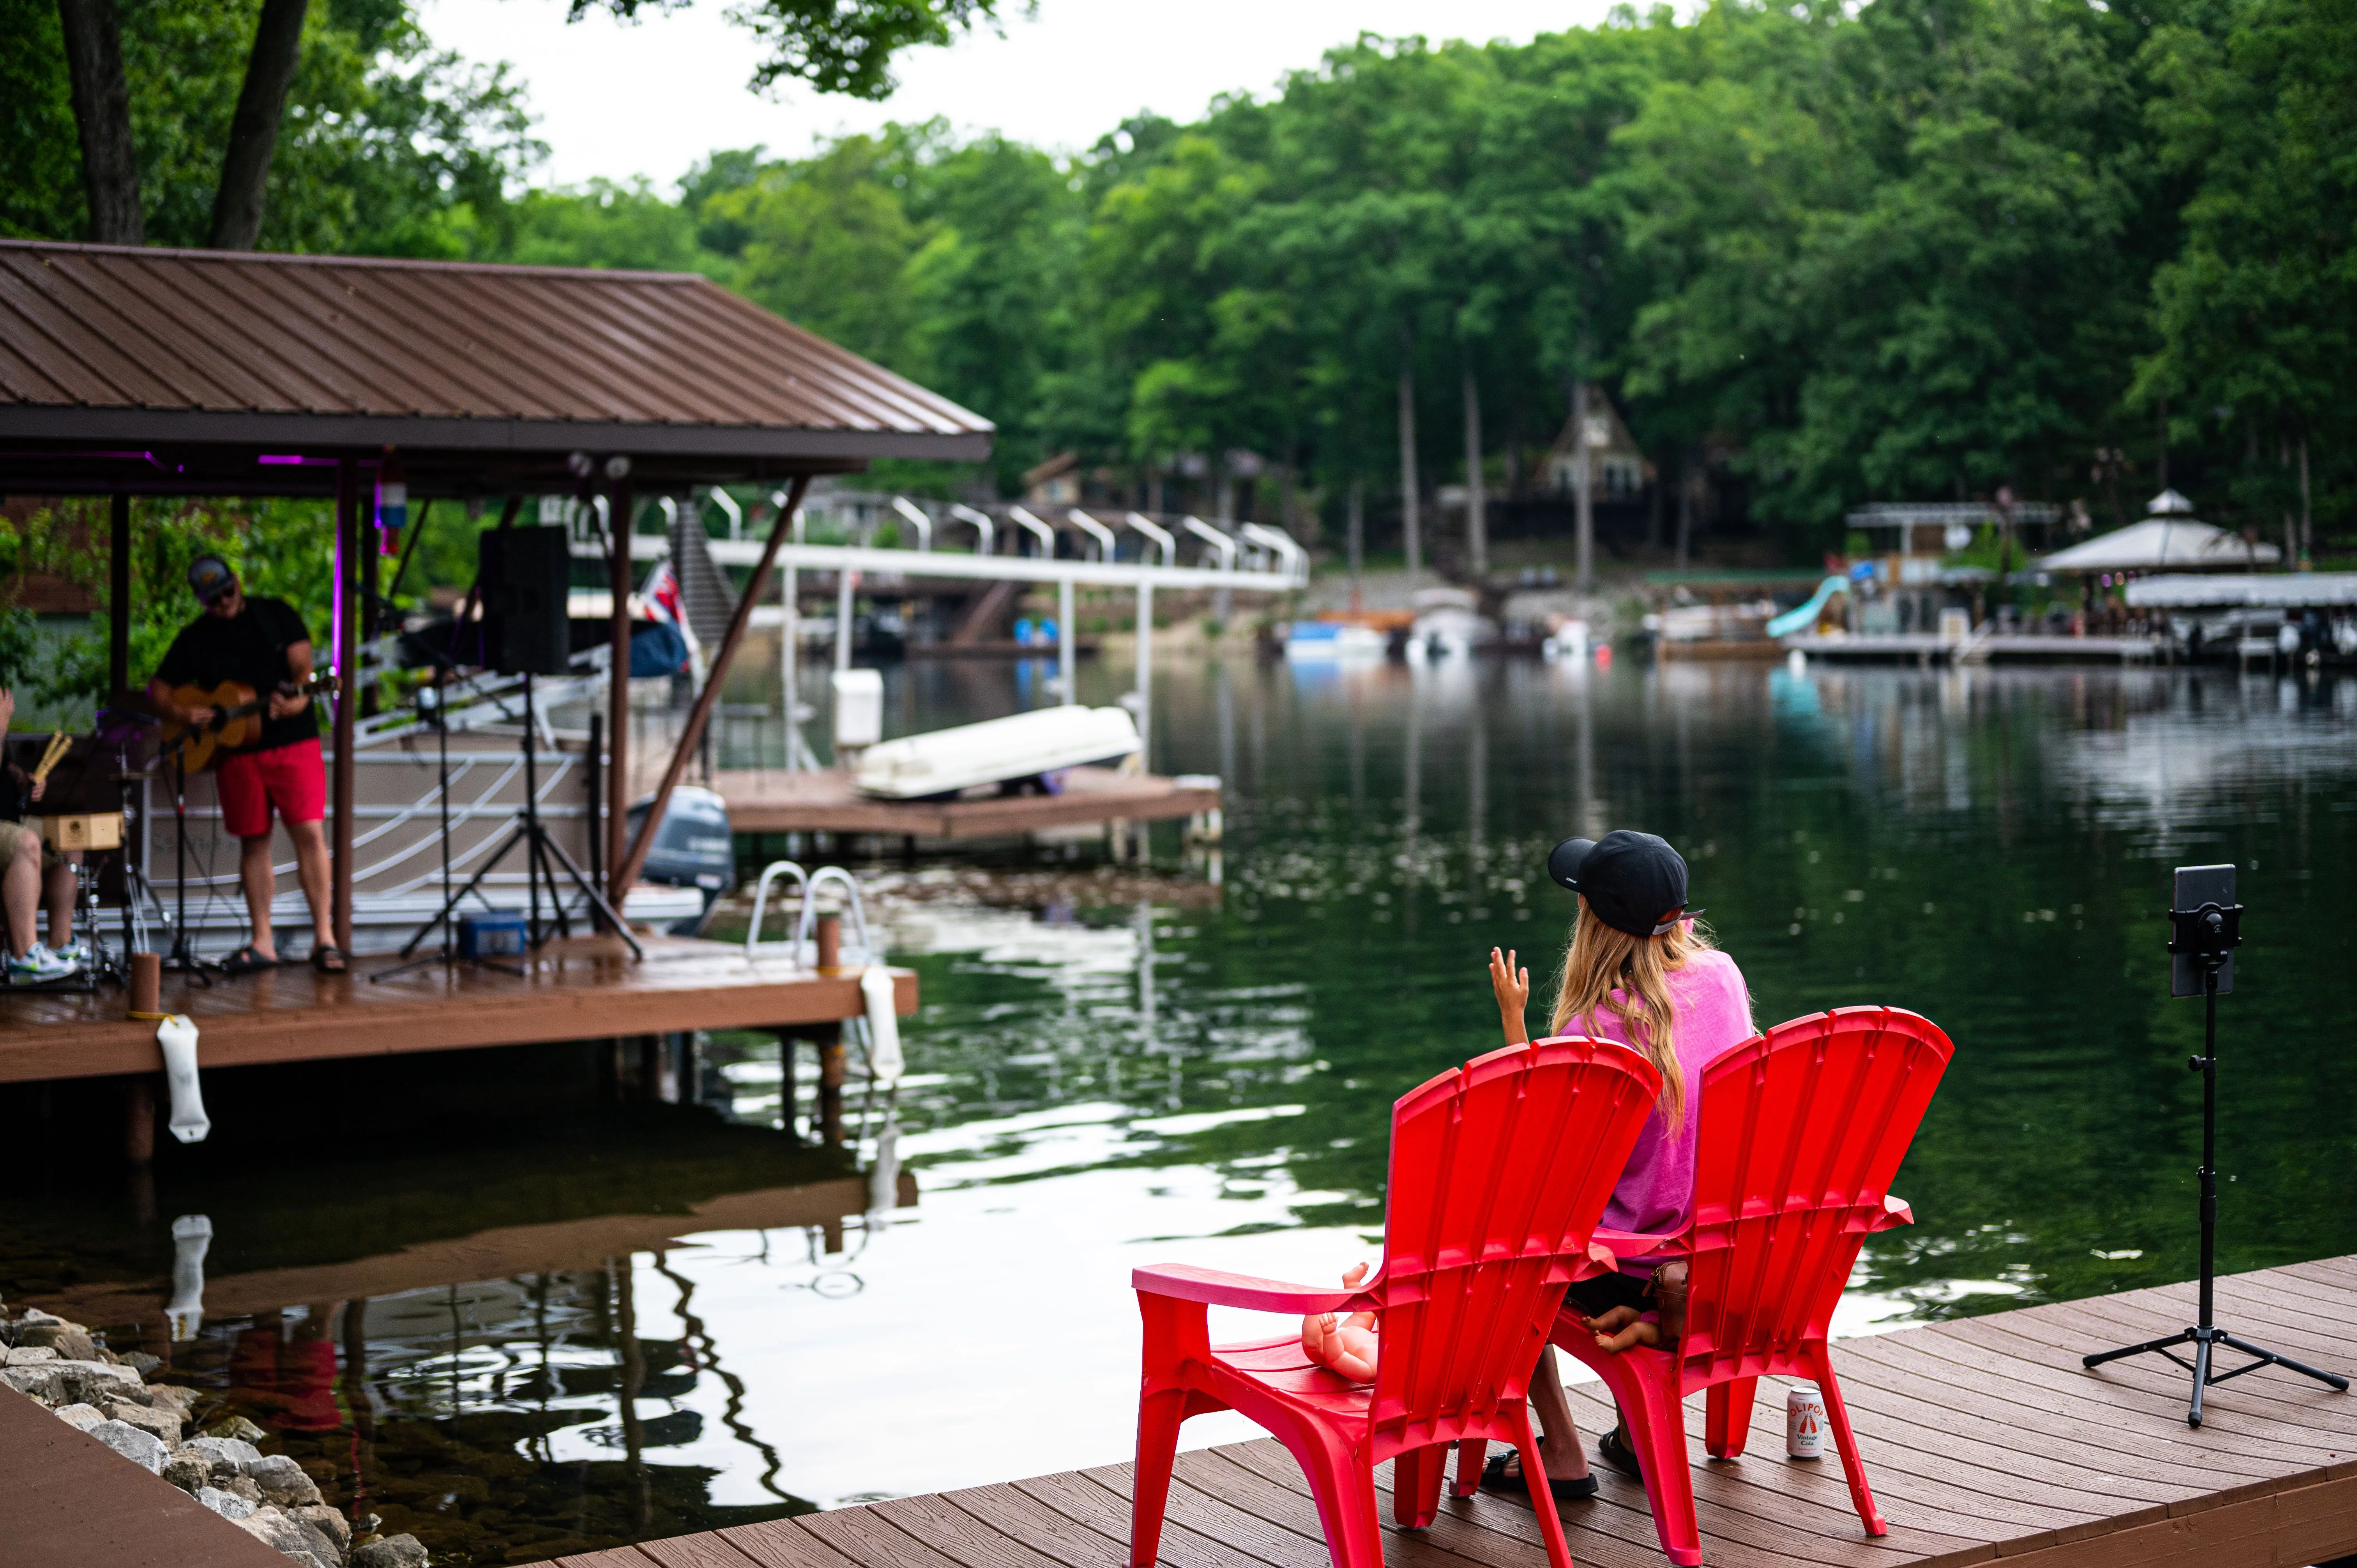  A person sitting on a red chair by a calm lake, gazing out at a dock with boats and a gazebo with a musician performing.